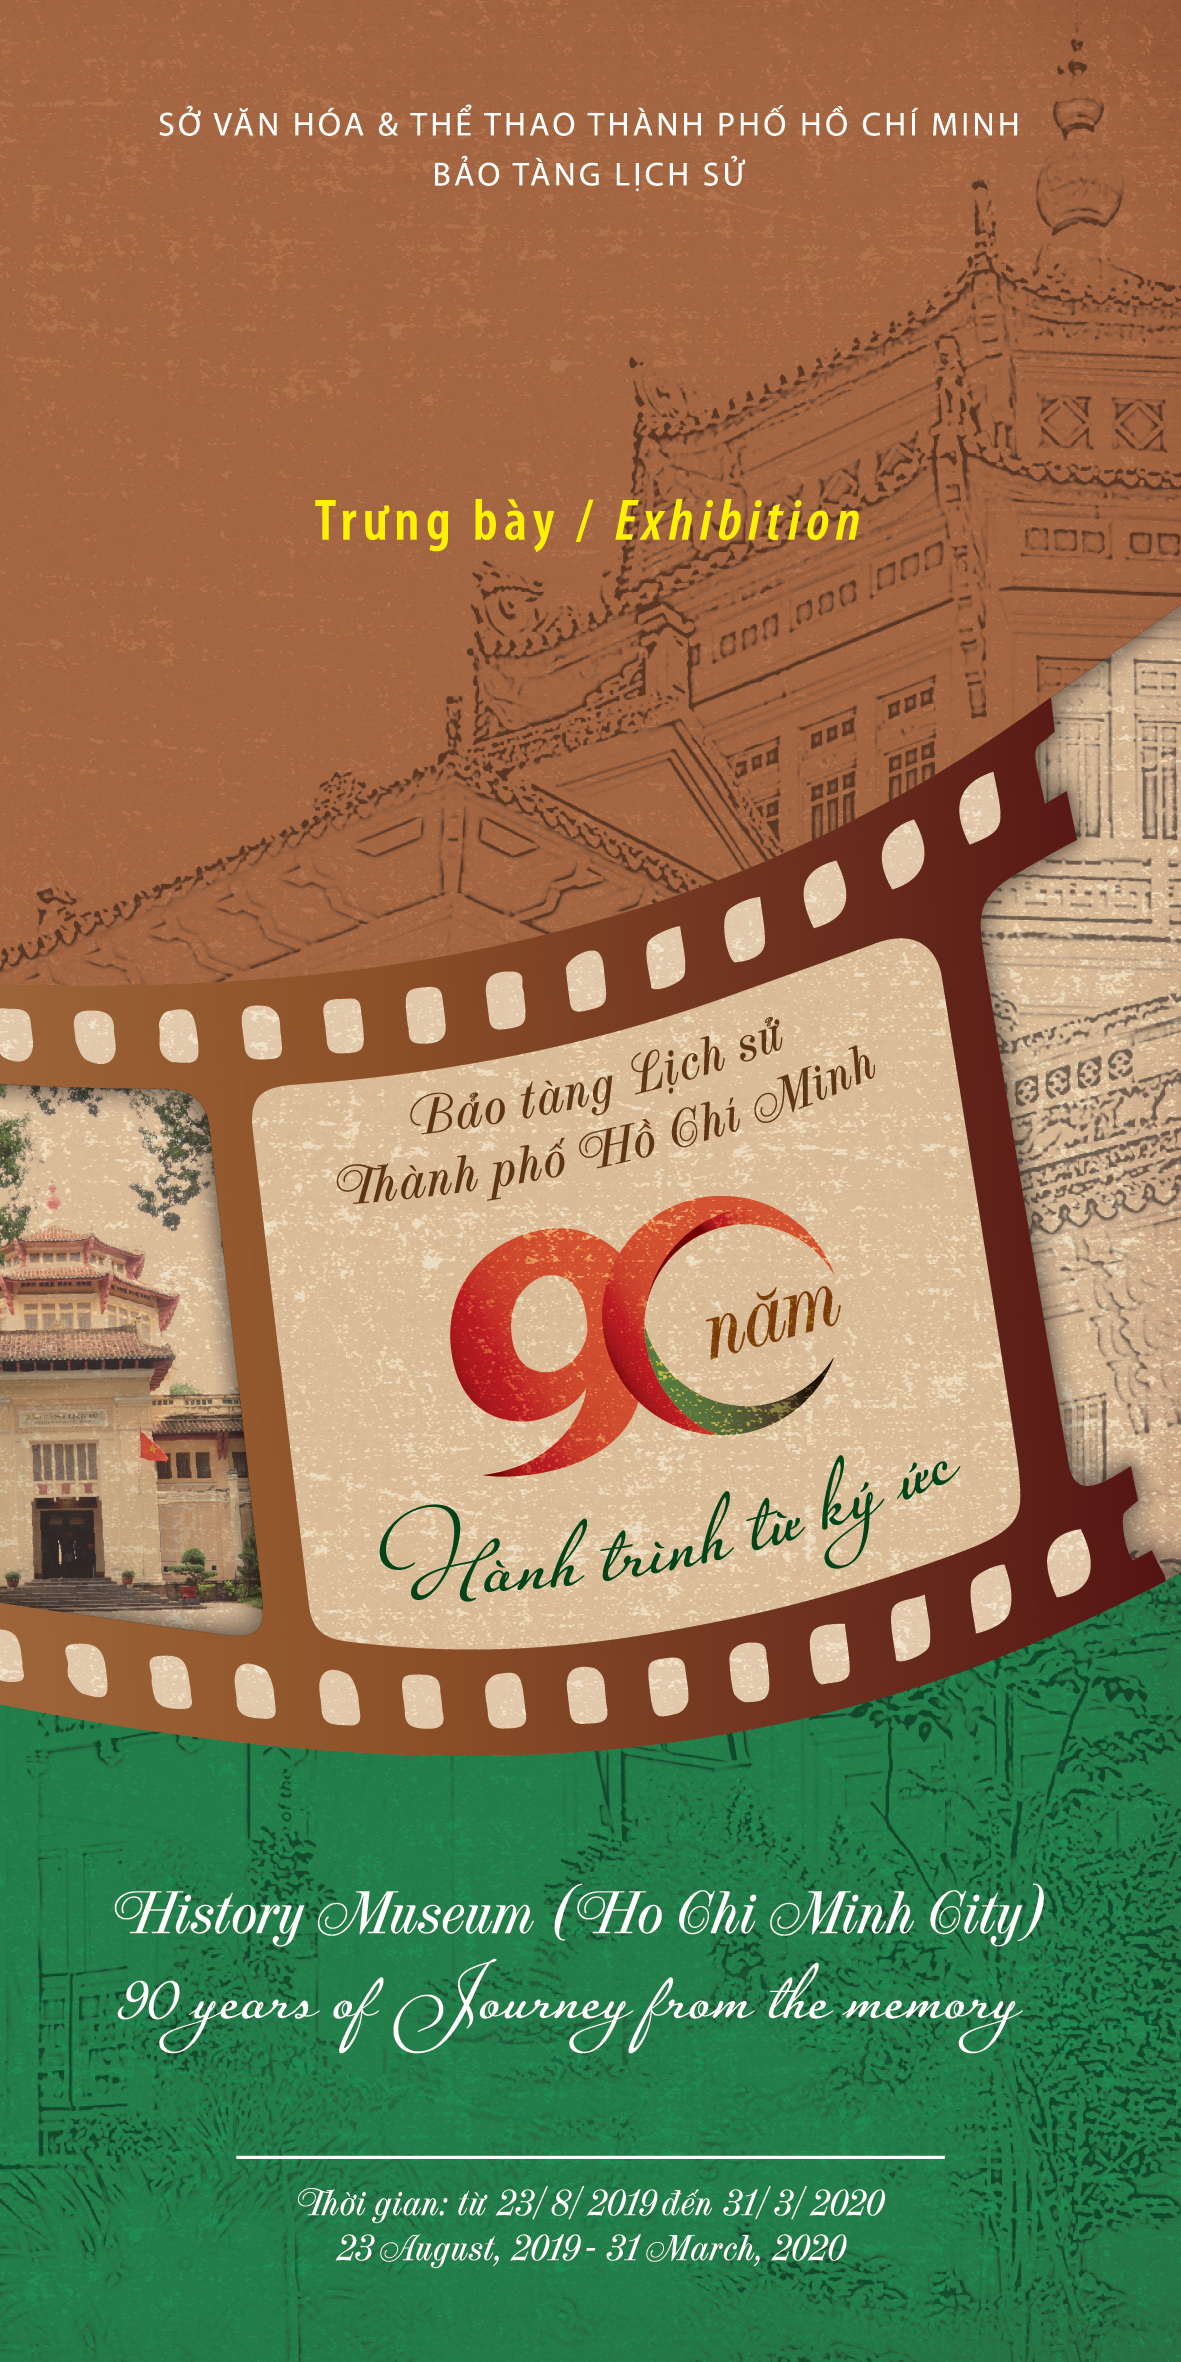 History Museum (Ho Chi Minh City) - 90 years of journey from the memory